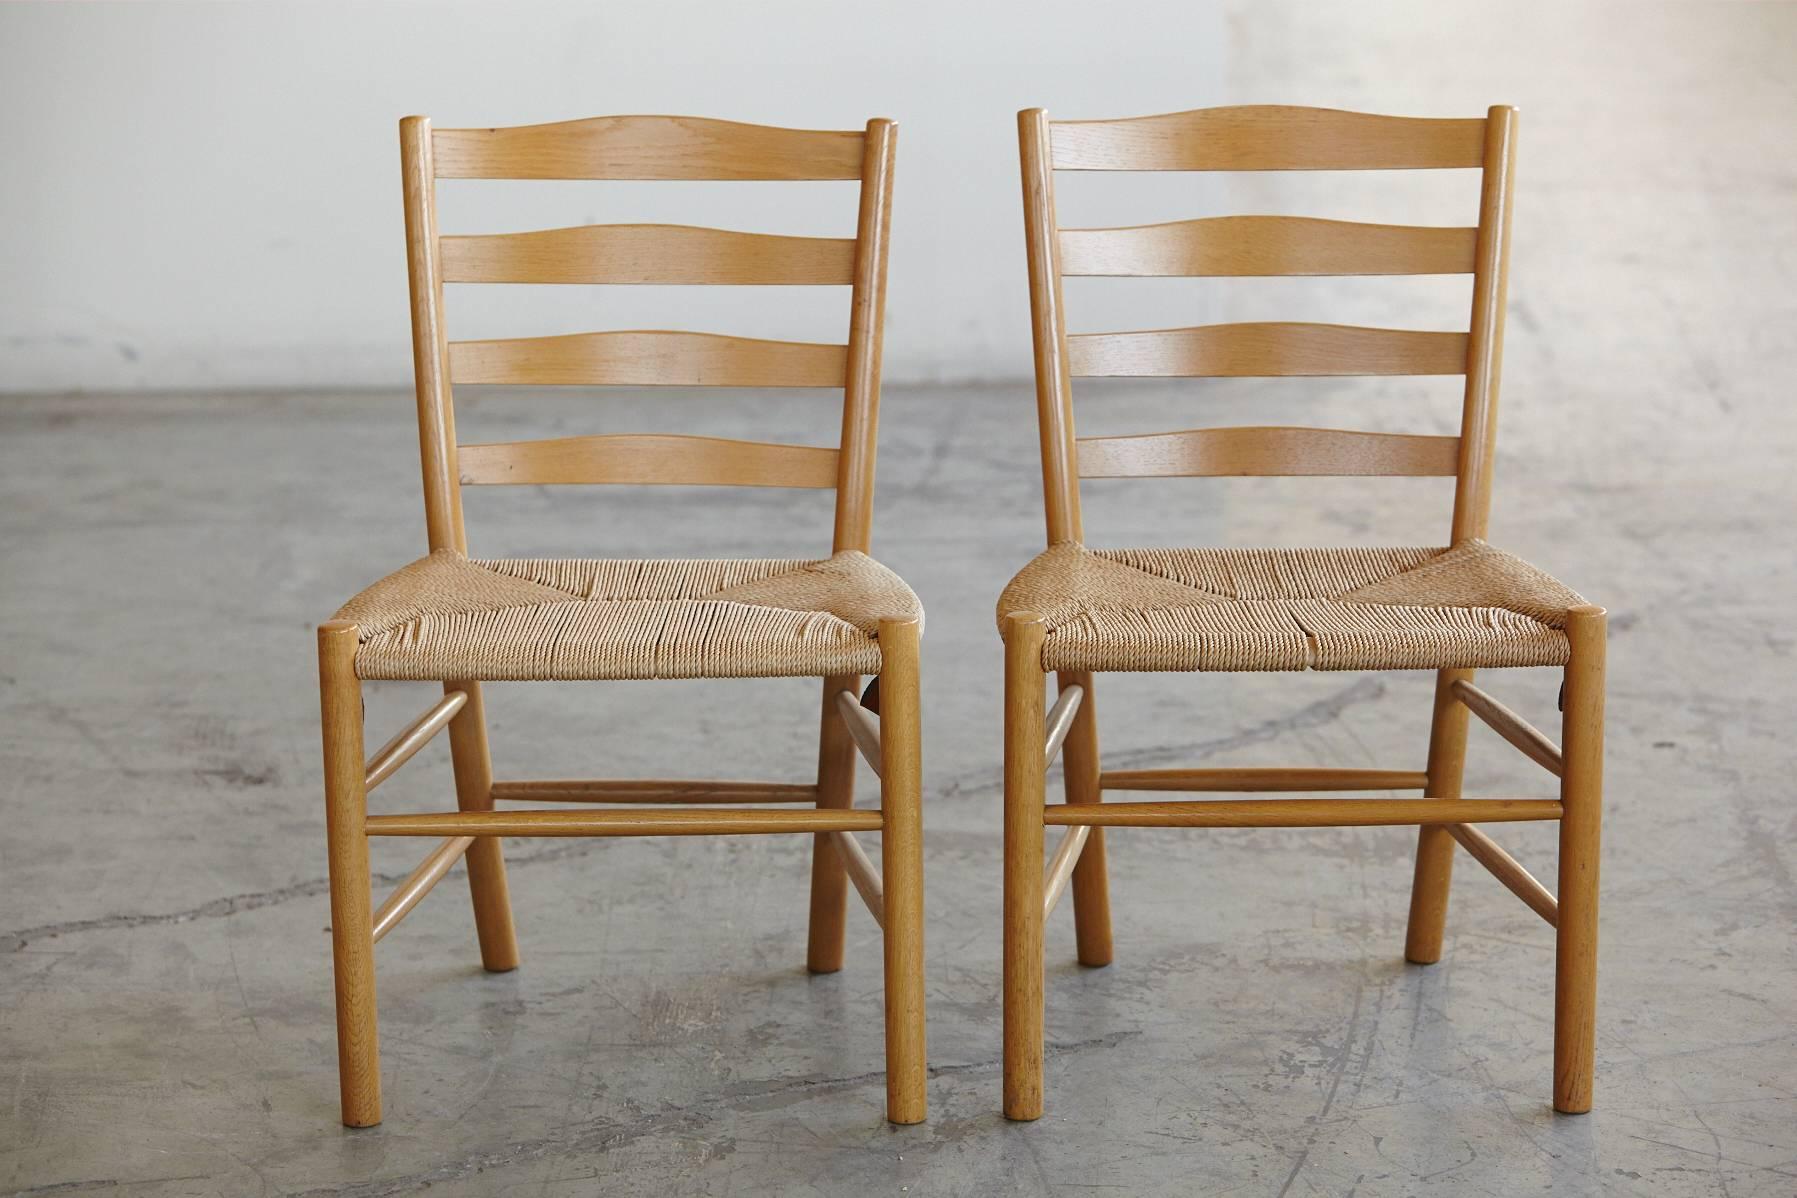 Danish 88 Chairs in Sets of 2, 4, 6, 8, 10 or More by Kaare Klint for Fritz Hansen